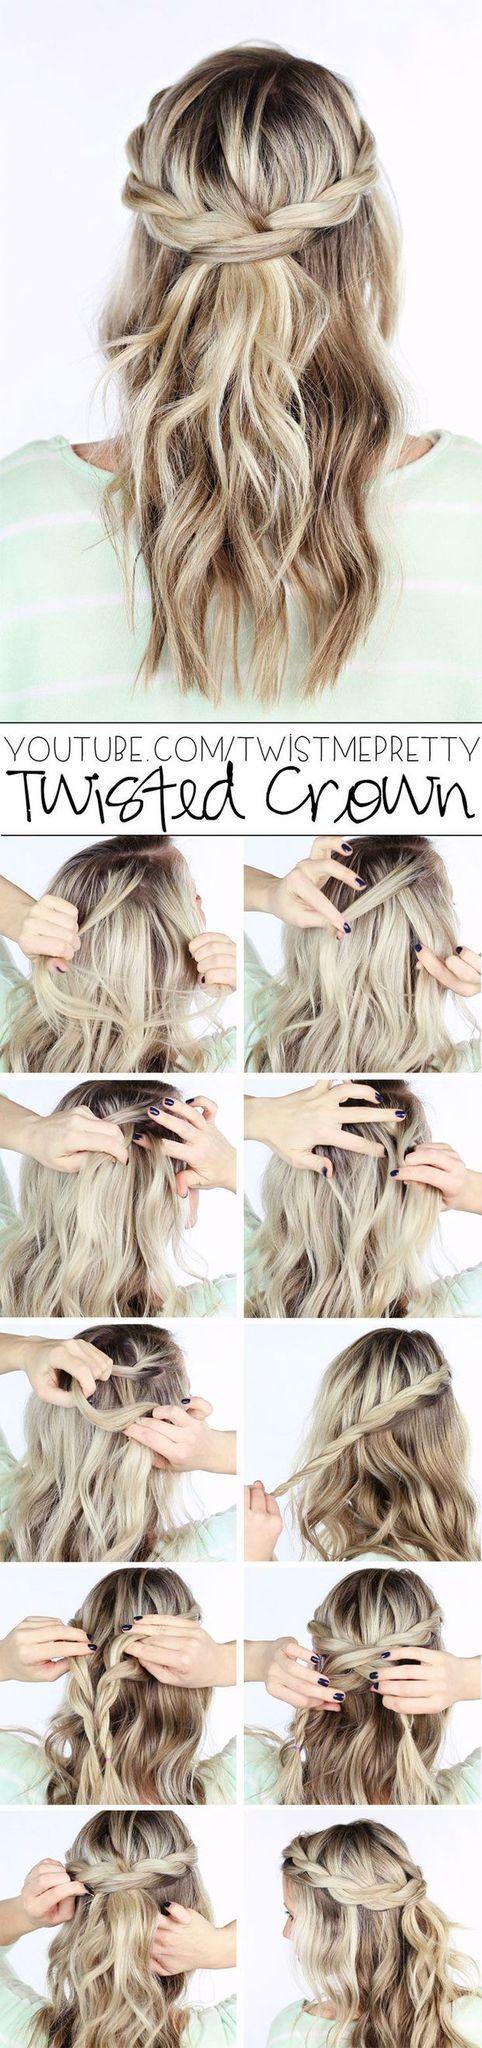 Wedding - 18 Pinterest Hair Tutorials You Need To Try